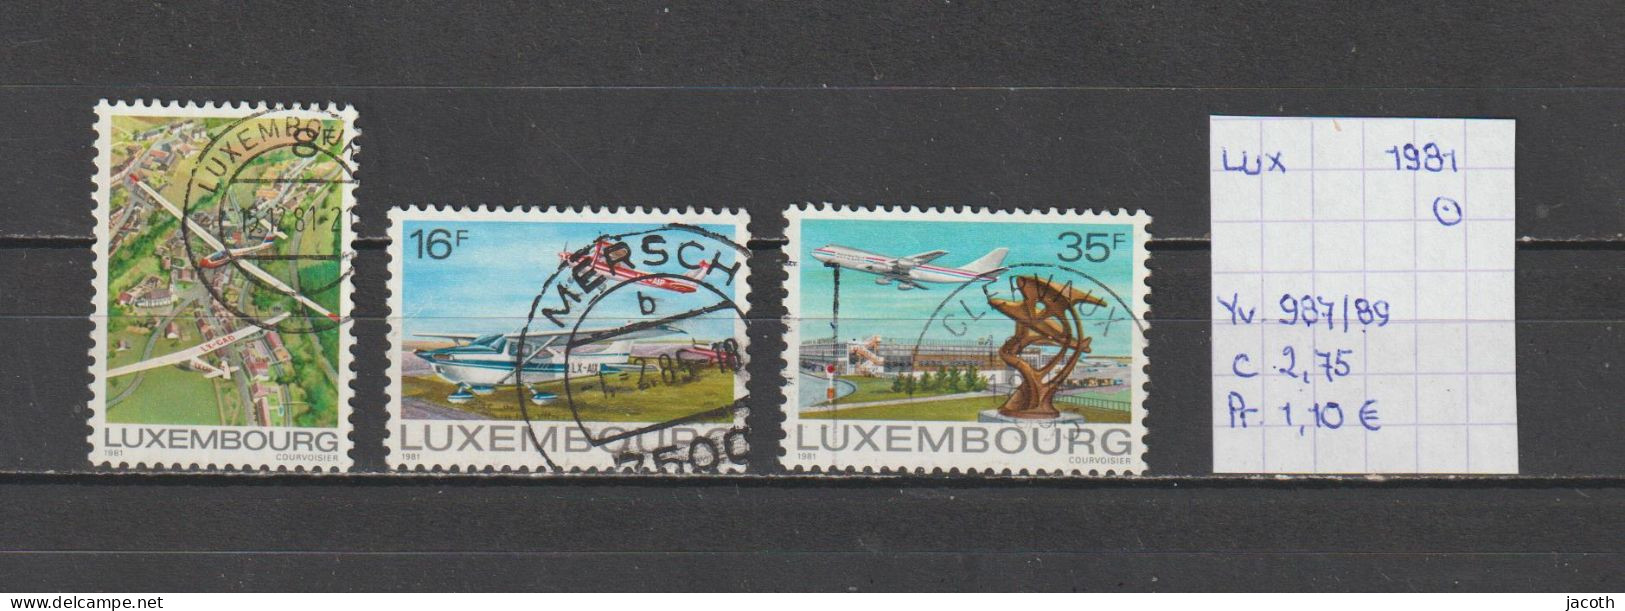 (TJ) Luxembourg 1981 - YT 987/89 (gest./obl./used) - Used Stamps